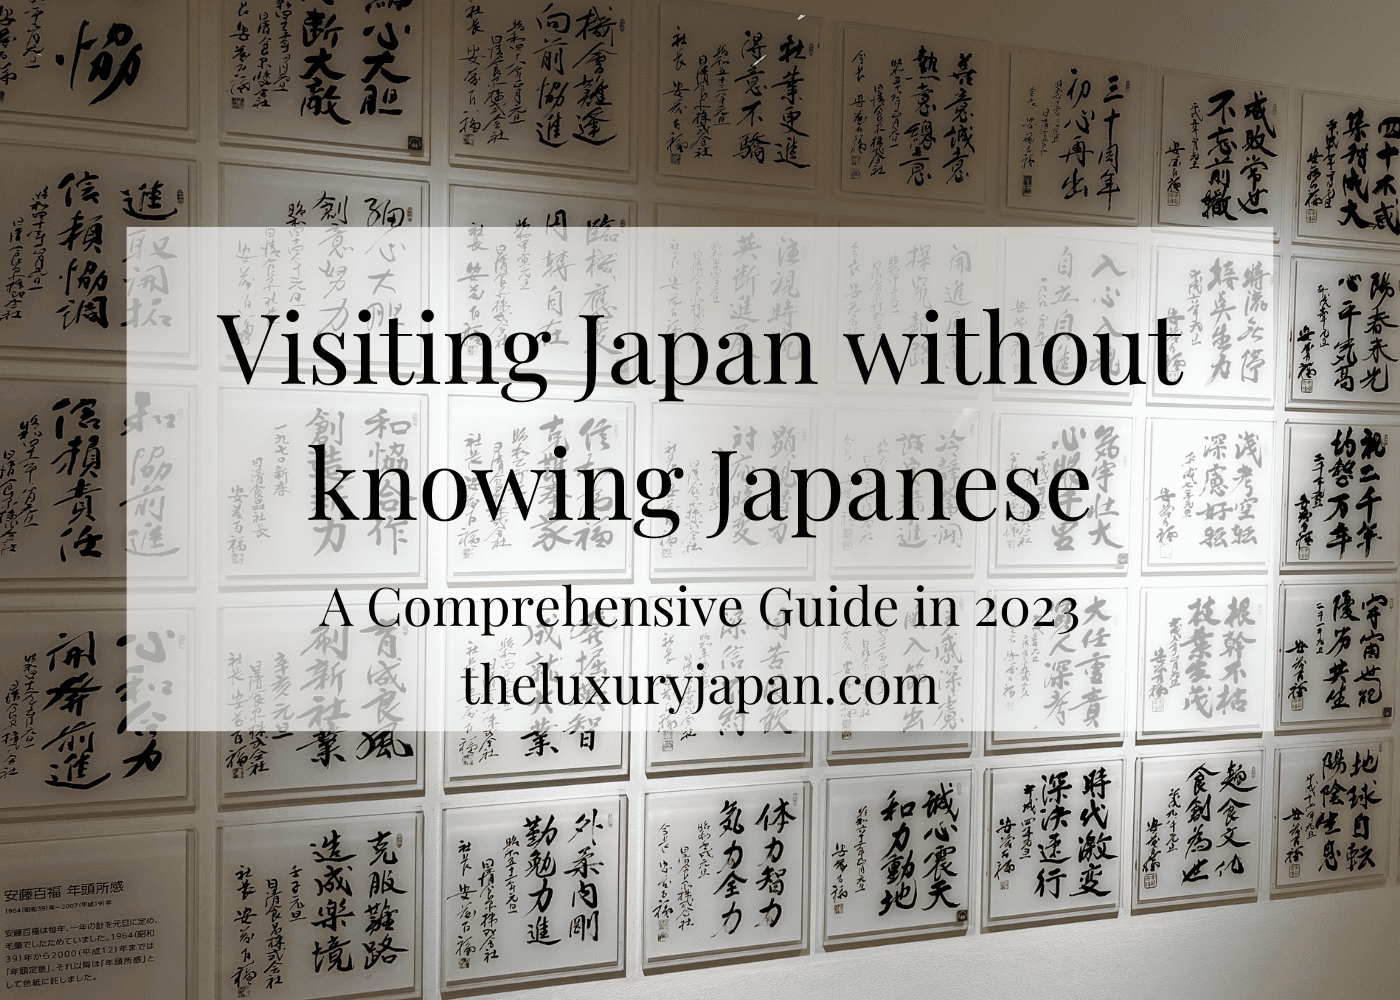 A background full of Japanese letters, with an English text "Visiting Japan without knowing Japanese A comprehensive guide in 2023 theluxuryjapan.com